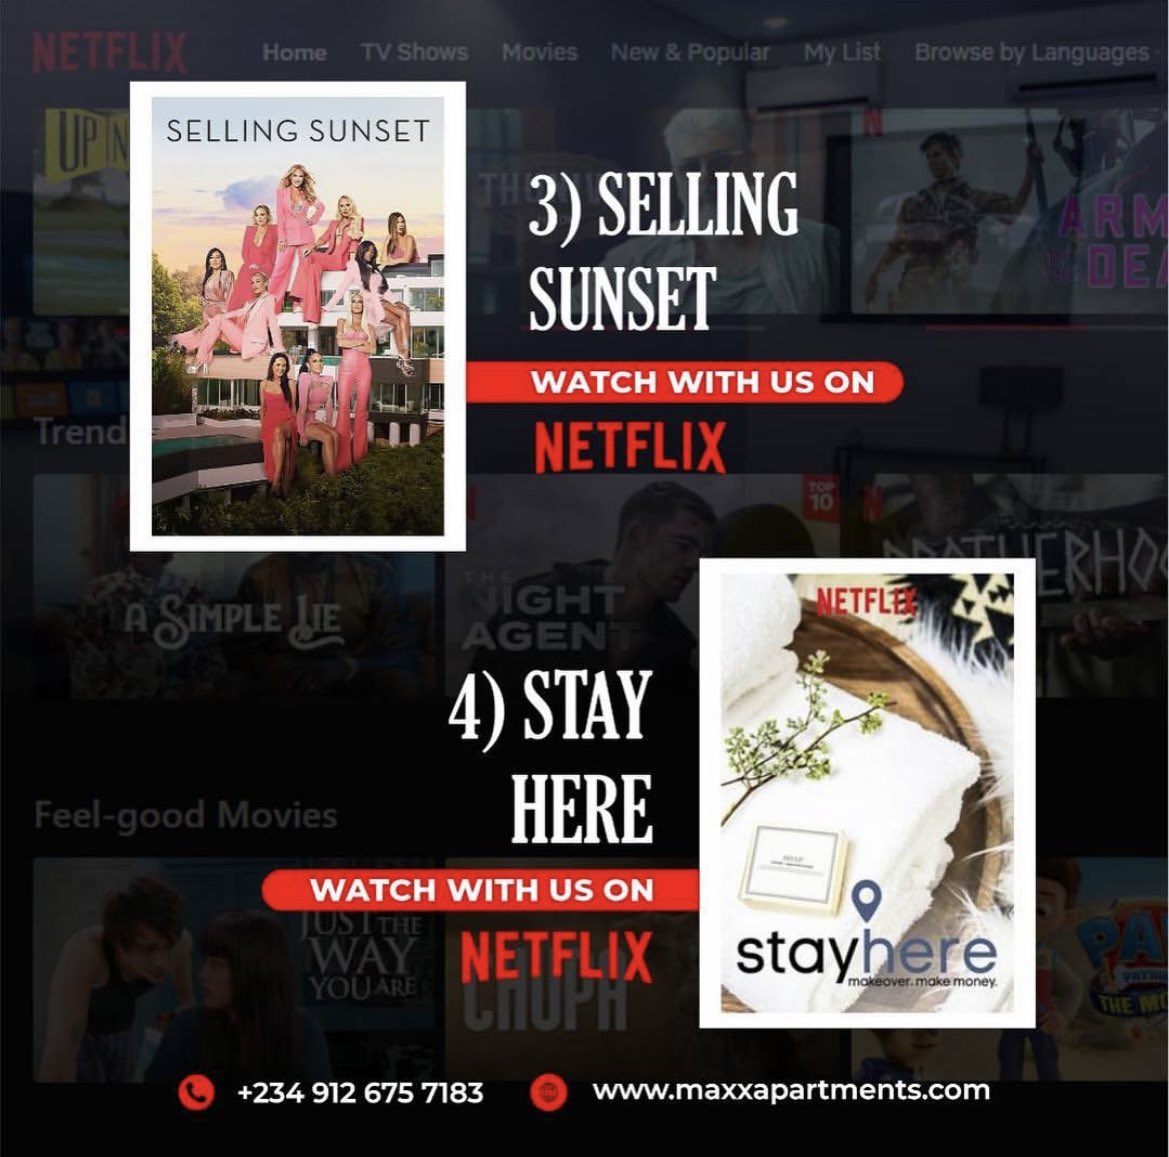 Here are real estate shows you might want to binge watch. For info on our short-lets, visit maxxapartments.com or call +2348023927991 #netflixshows #shortlethomes #shortletapartments #airbnb #ibadanlawa #ibadantwitter